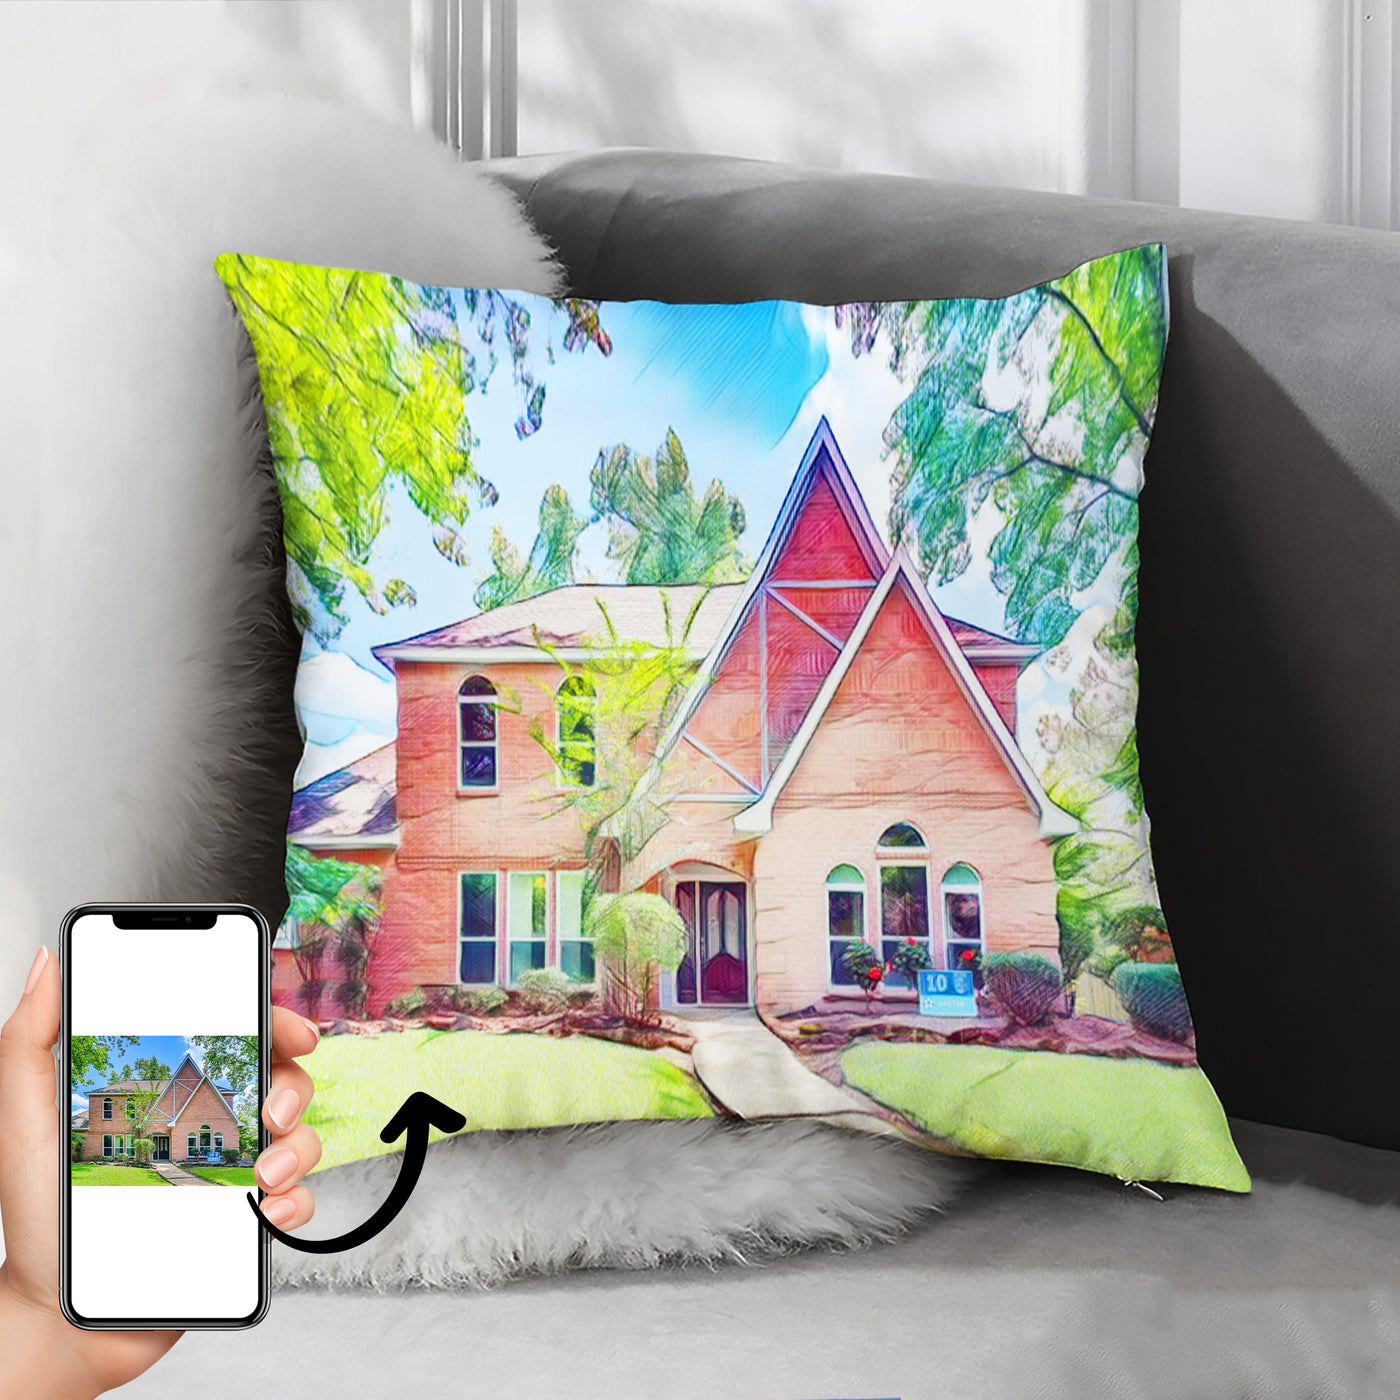 Custom Art Deco Throw Pillows Made from Yard Photo for Sofa,Couch,Cafe